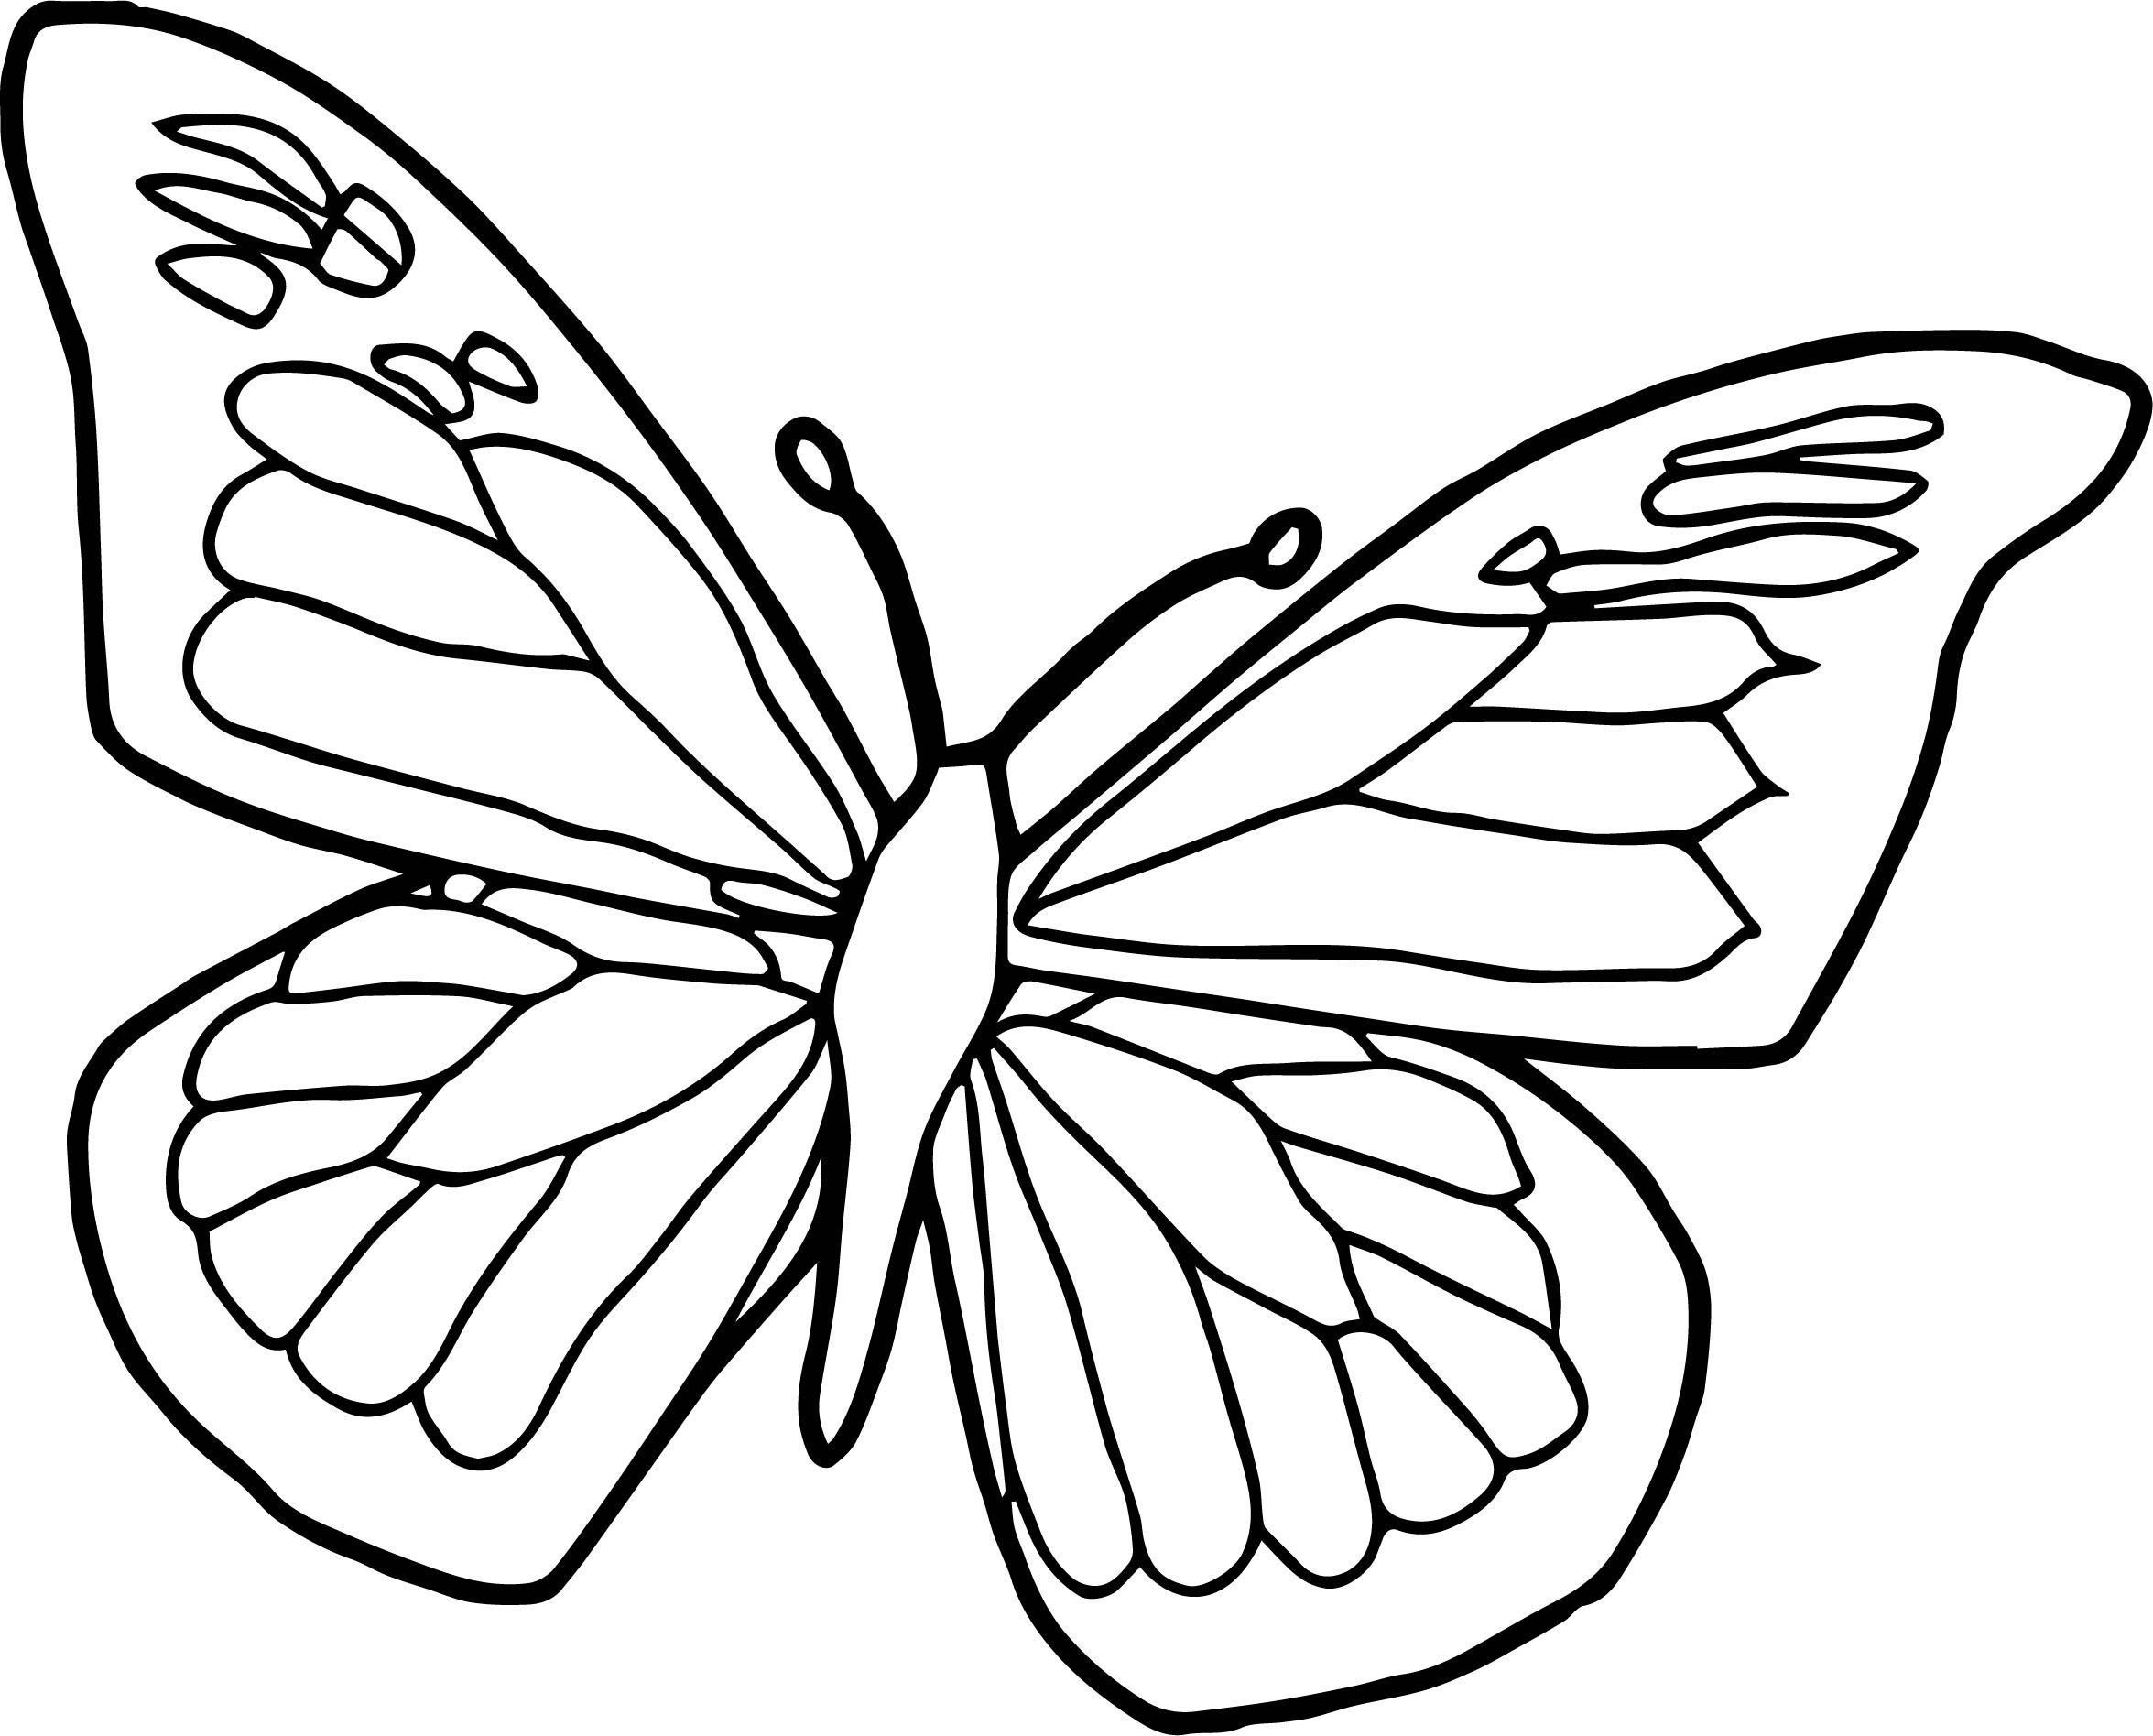 Butterfly Coloring Page from ClipArtMag